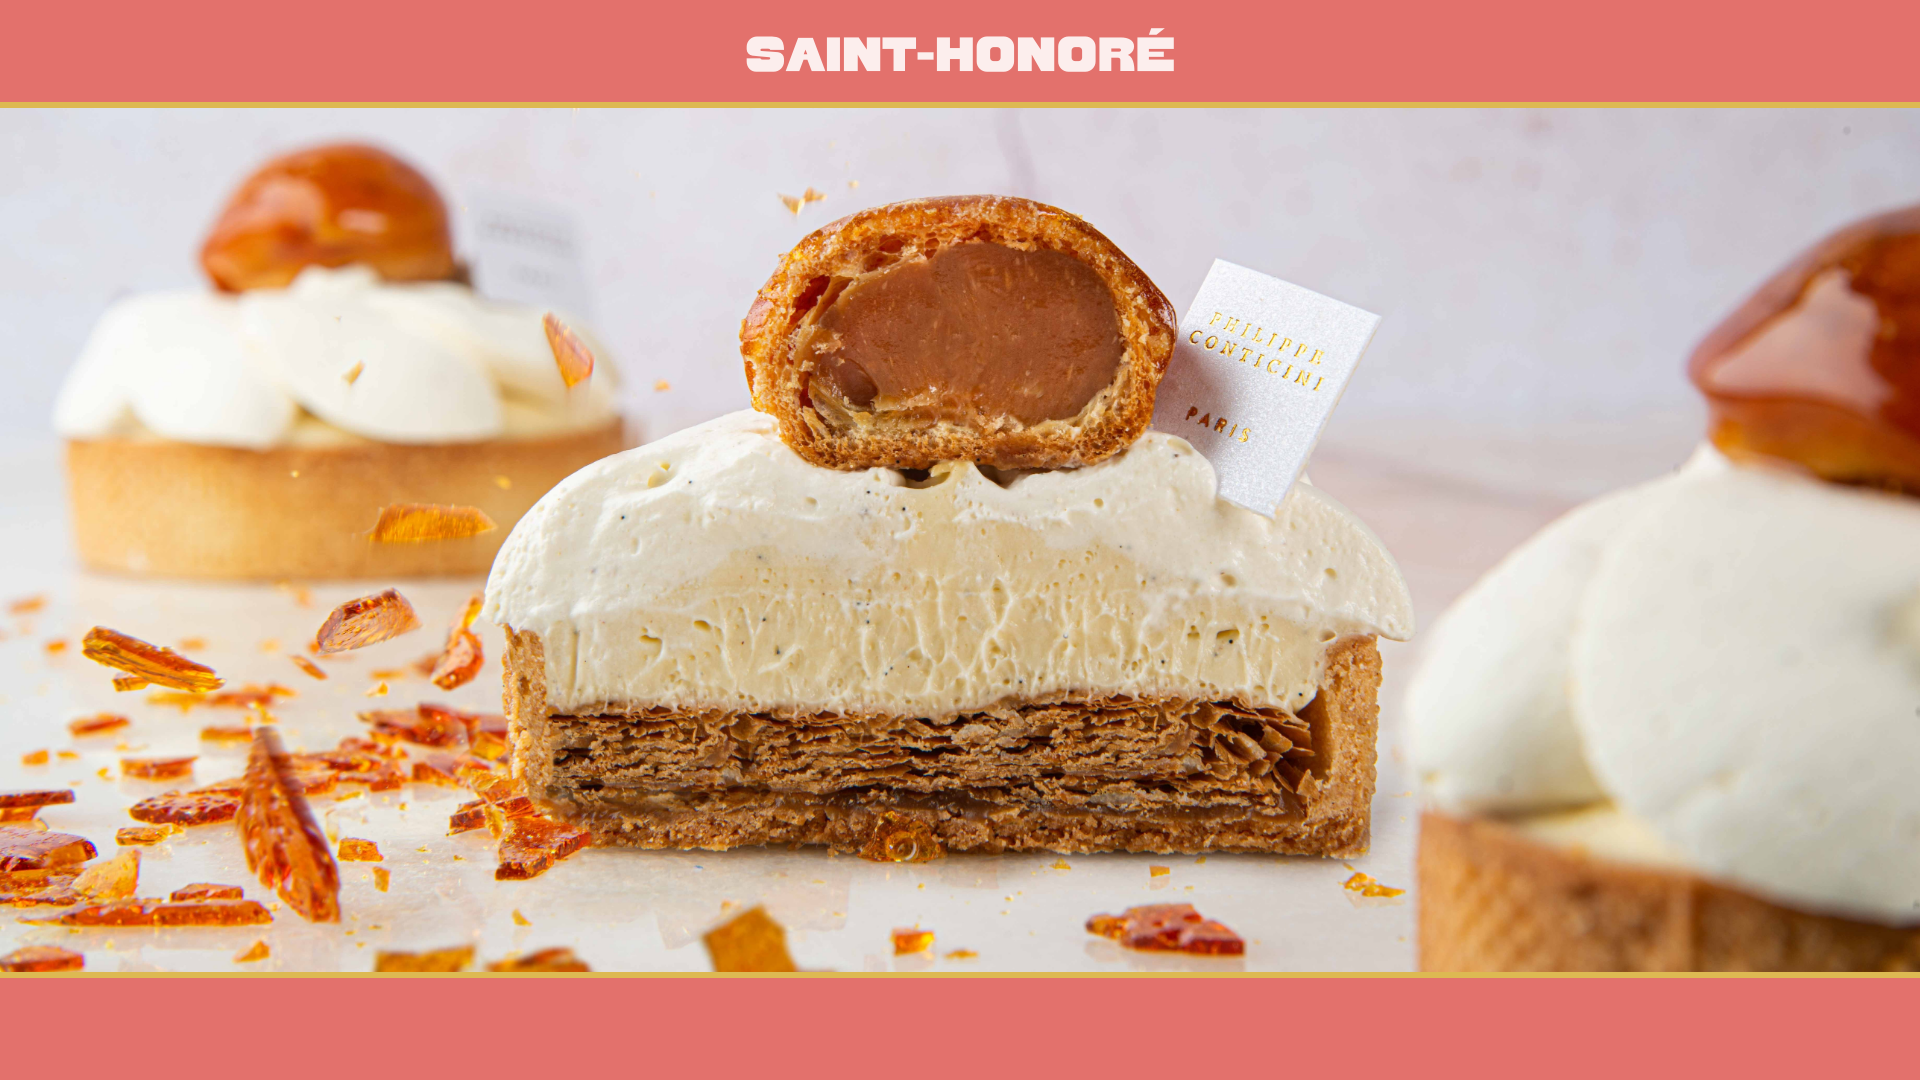 Saint Honore pastry split in half to showcase its goey caramel center and cream topping